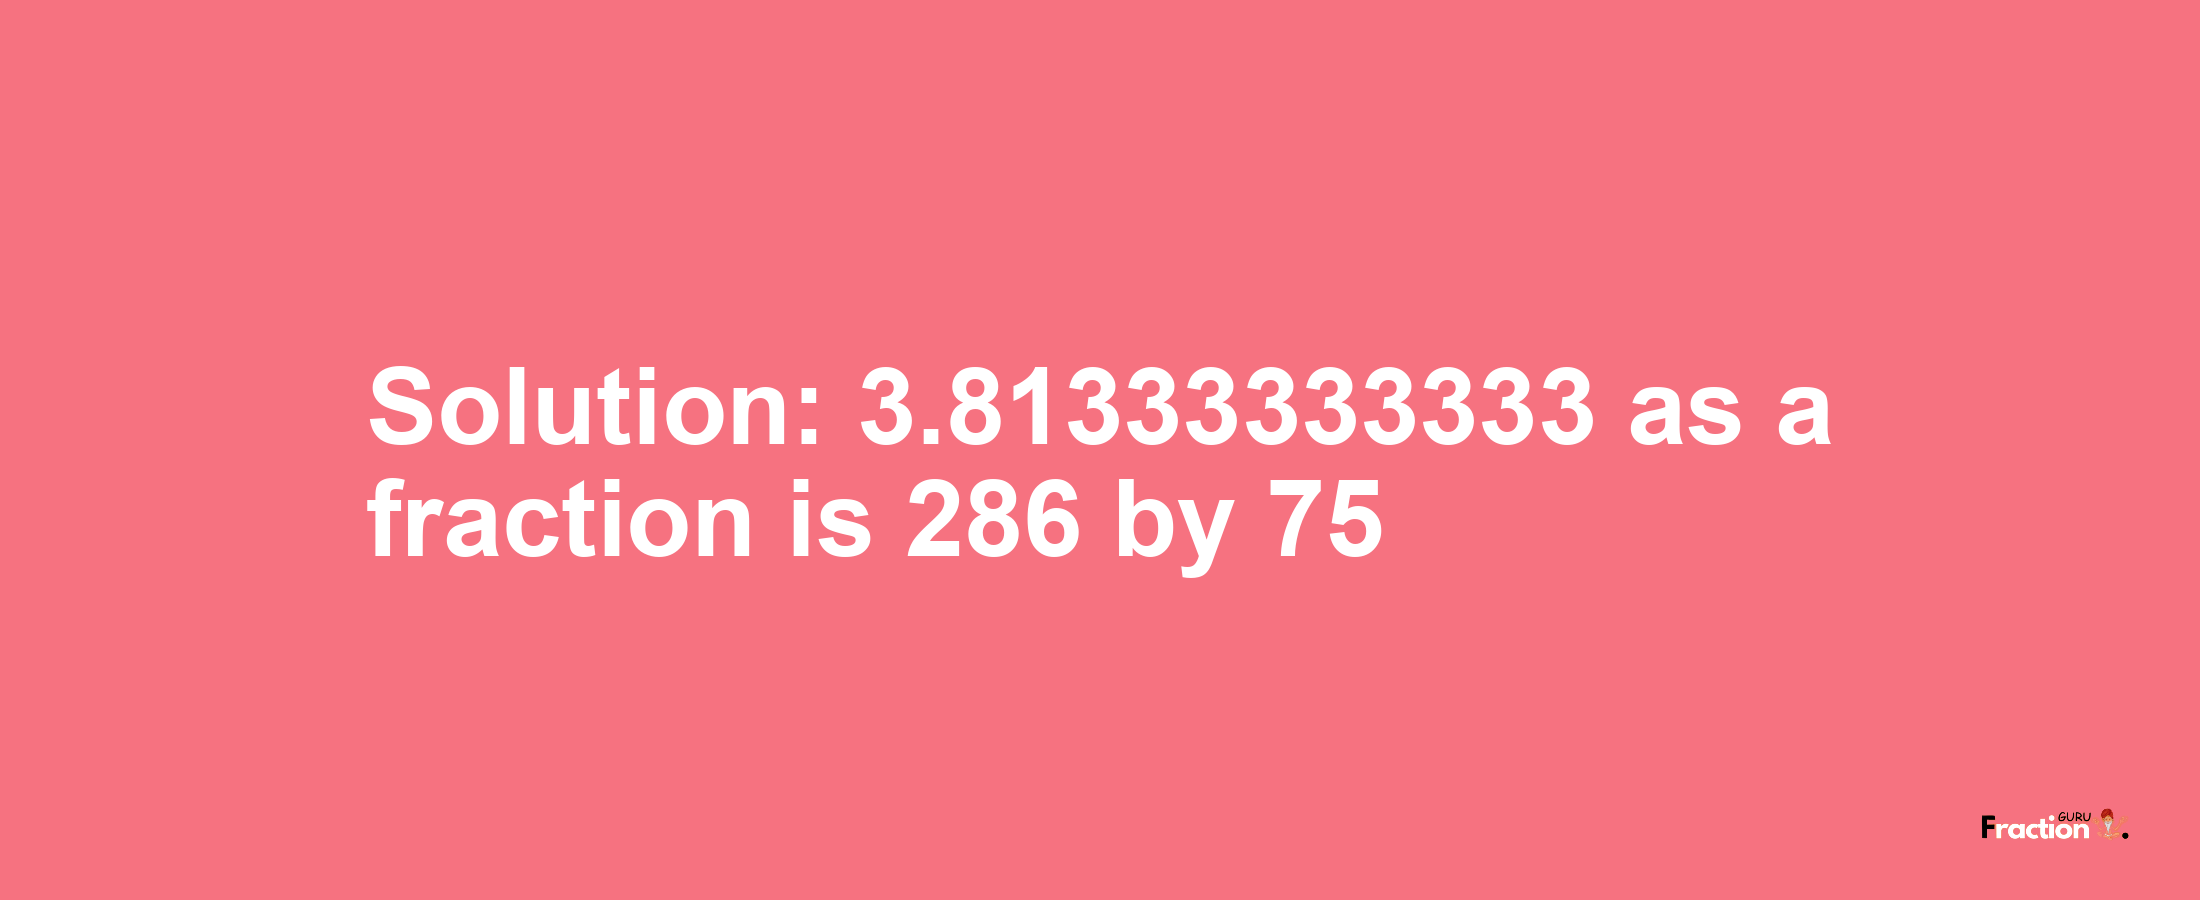 Solution:3.81333333333 as a fraction is 286/75